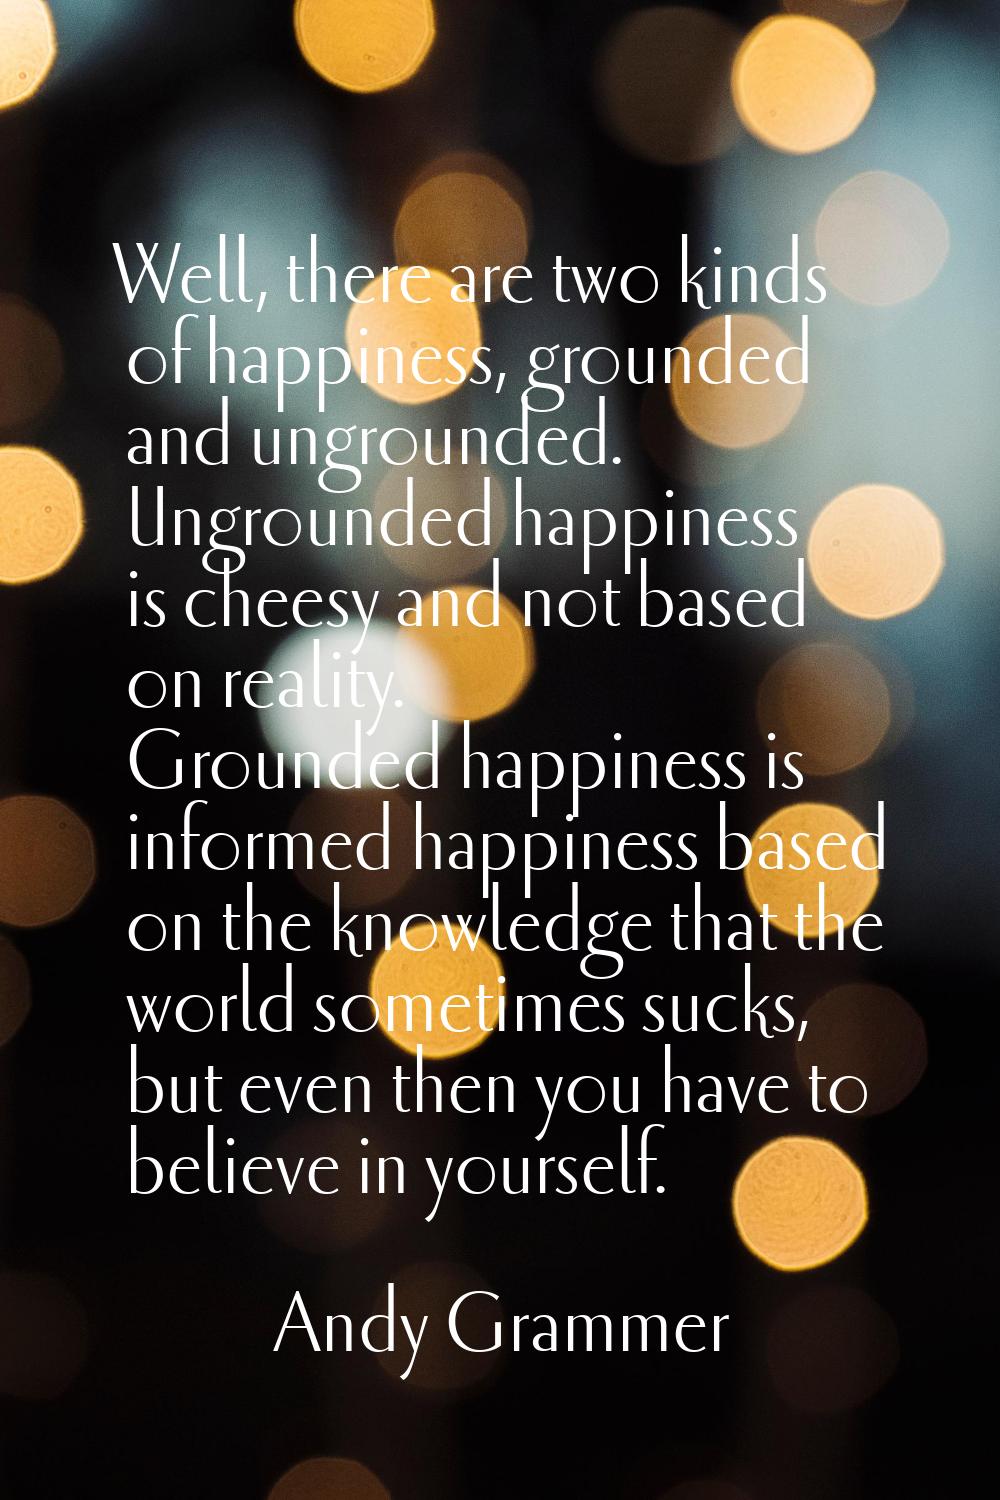 Well, there are two kinds of happiness, grounded and ungrounded. Ungrounded happiness is cheesy and